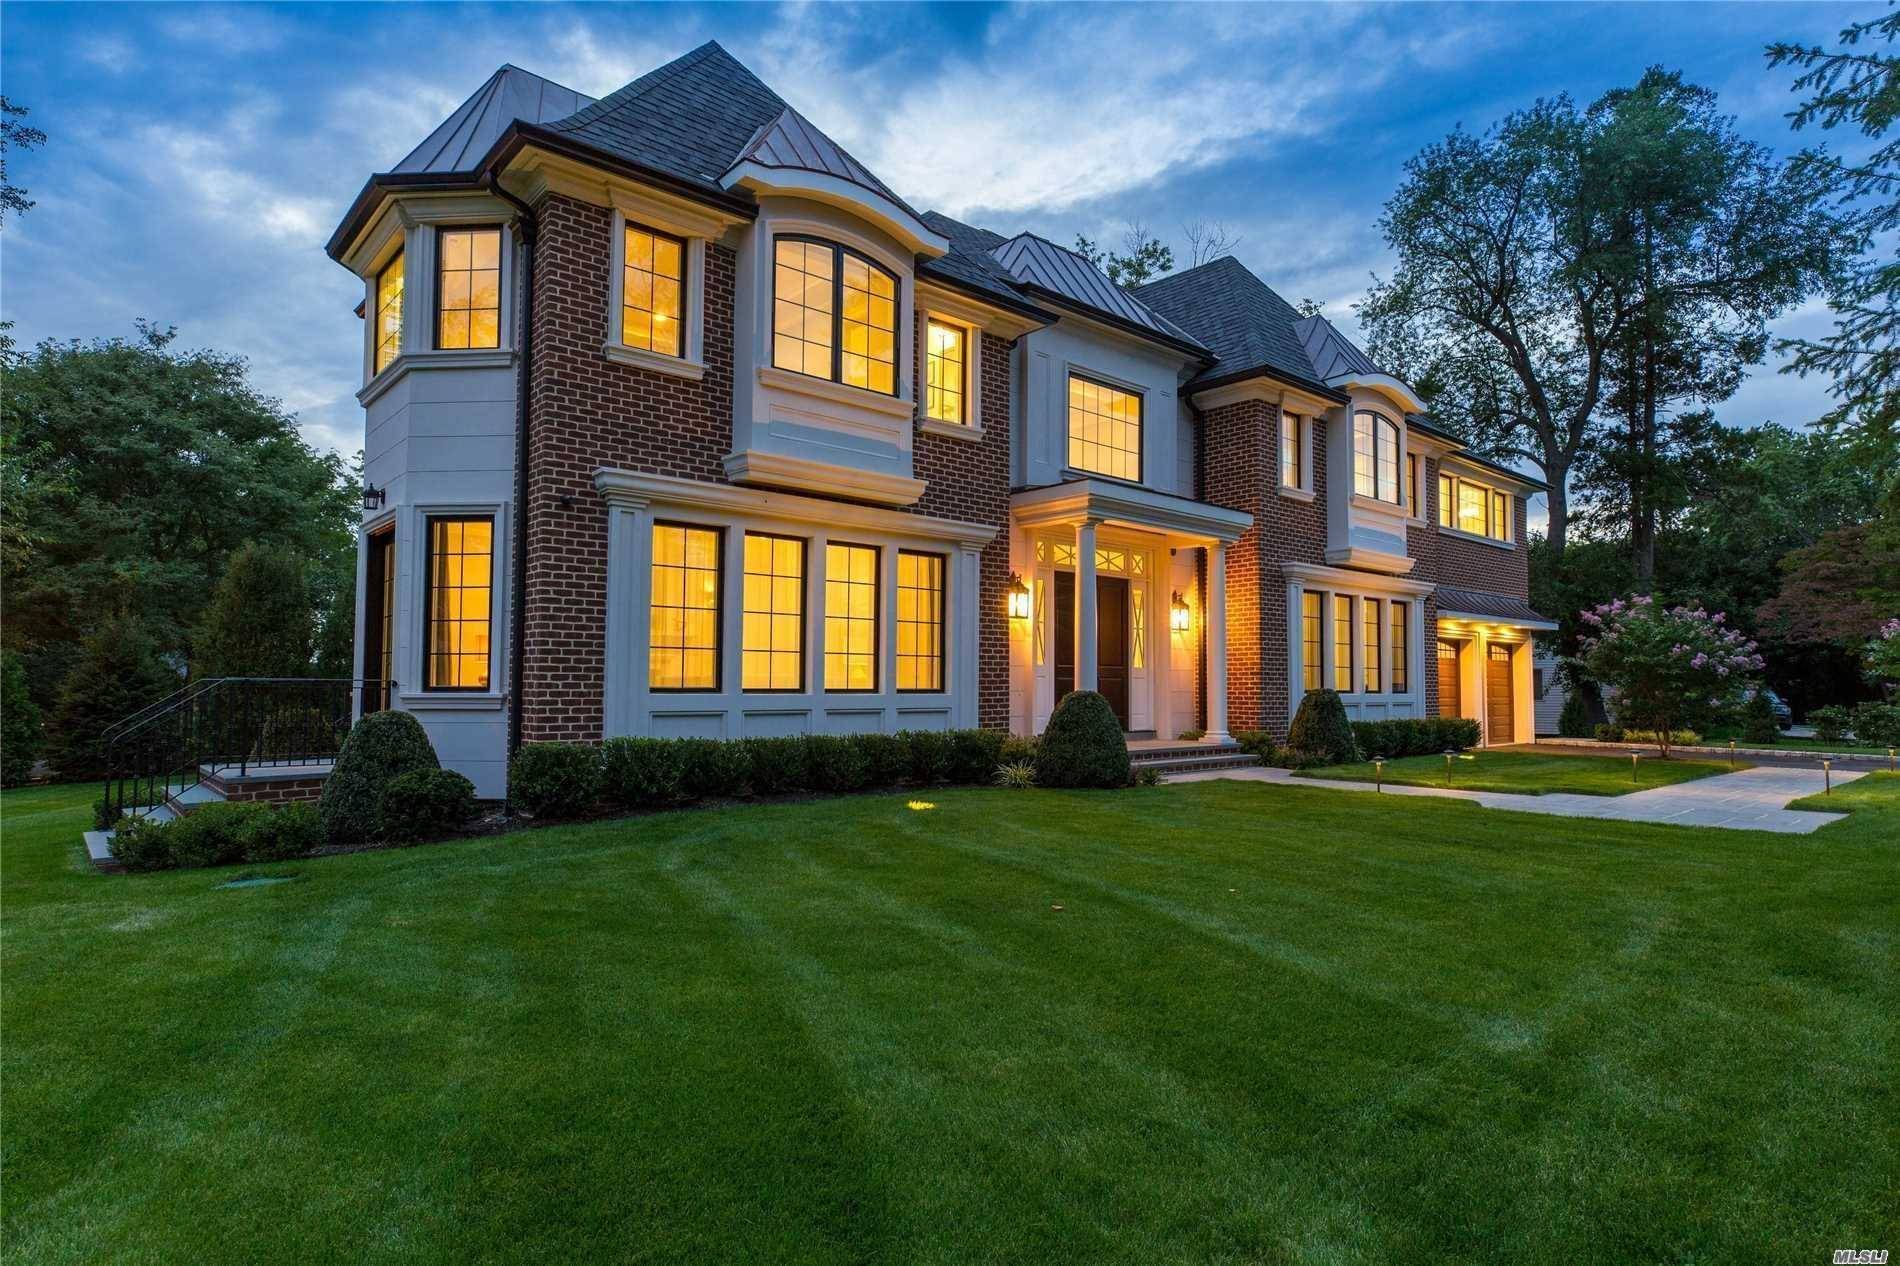 Spectacular New Luxury Construction In The Prestigious Village Of Great Neck Estates Offering Over 8,000 Square Feet Of Fabulous Living Space.